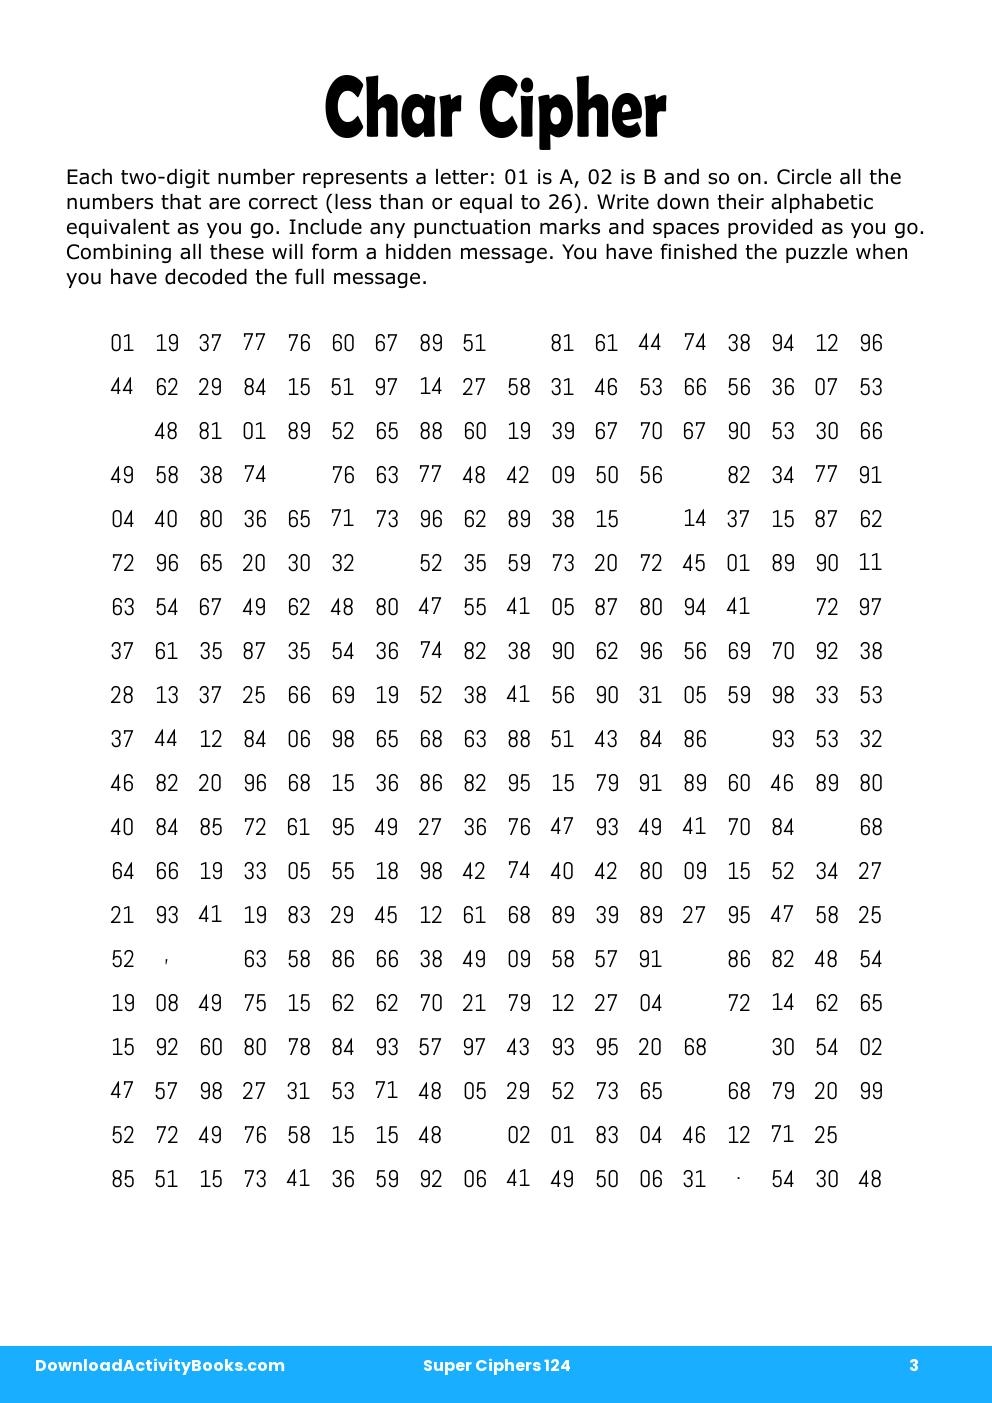 Char Cipher in Super Ciphers 124